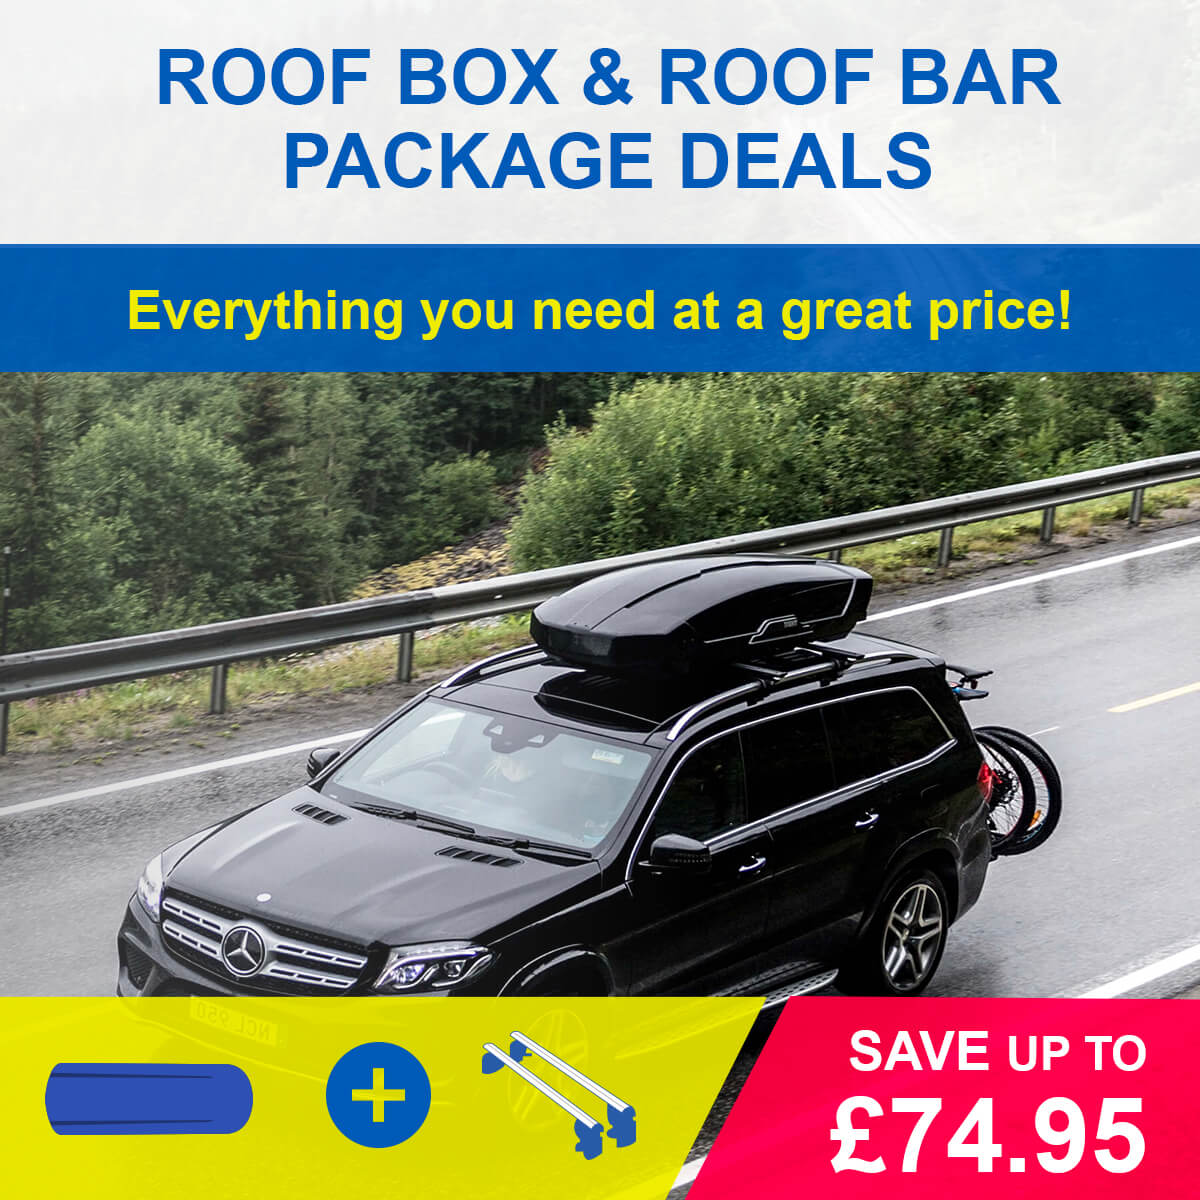 Roof Box & Bars Package Deals: Save when you buy your roof box and roof bars together